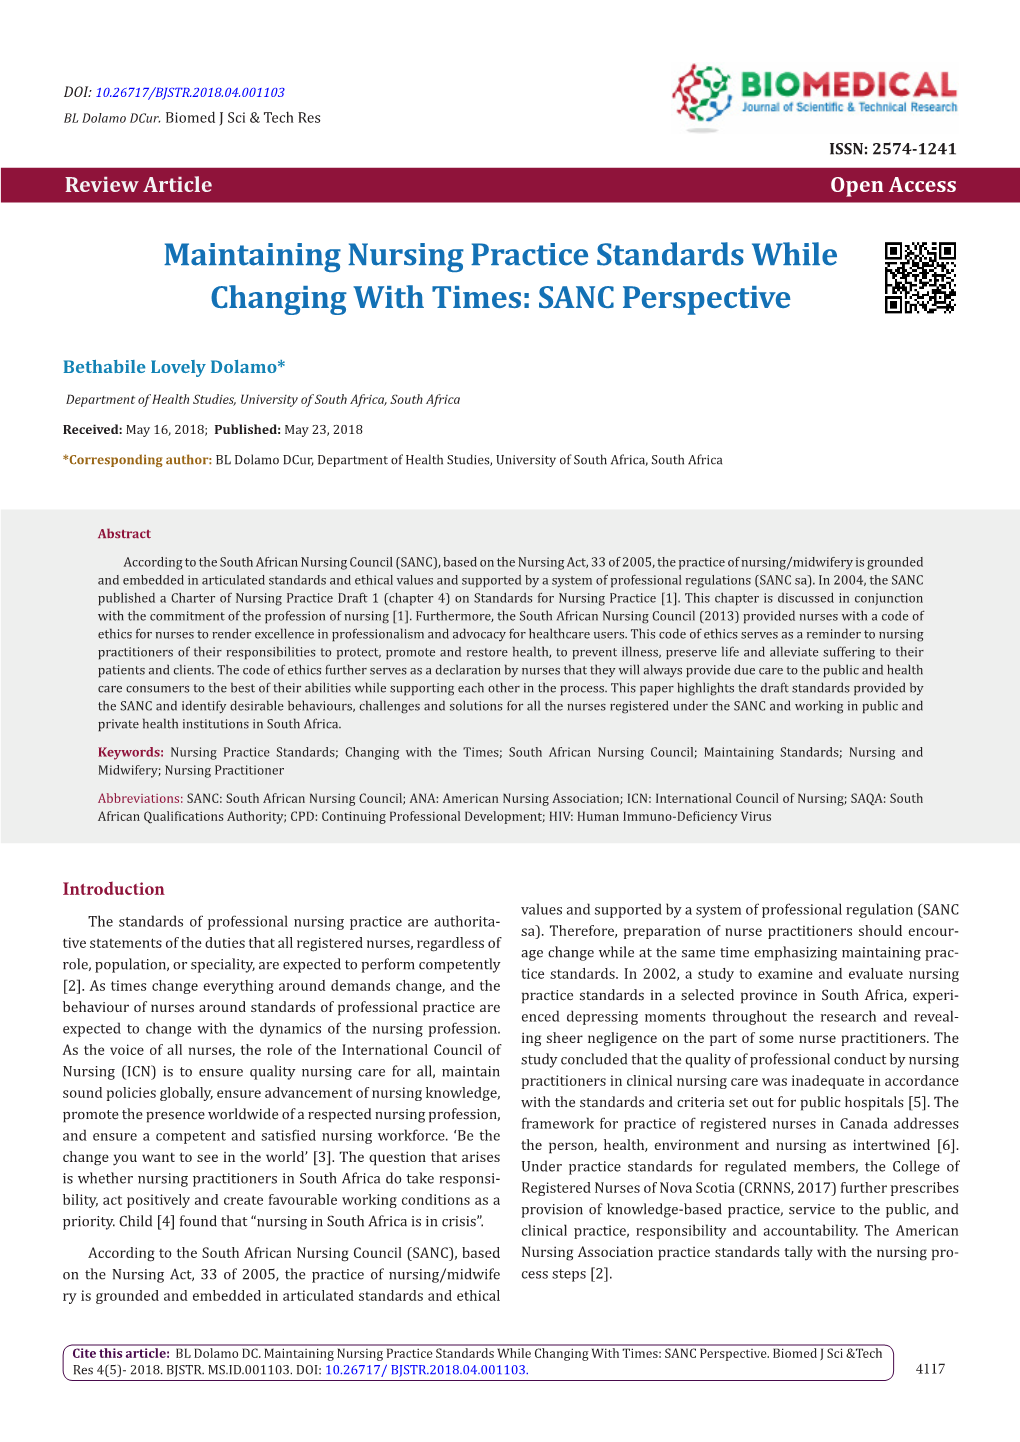 Maintaining Nursing Practice Standards While Changing with Times: SANC Perspective